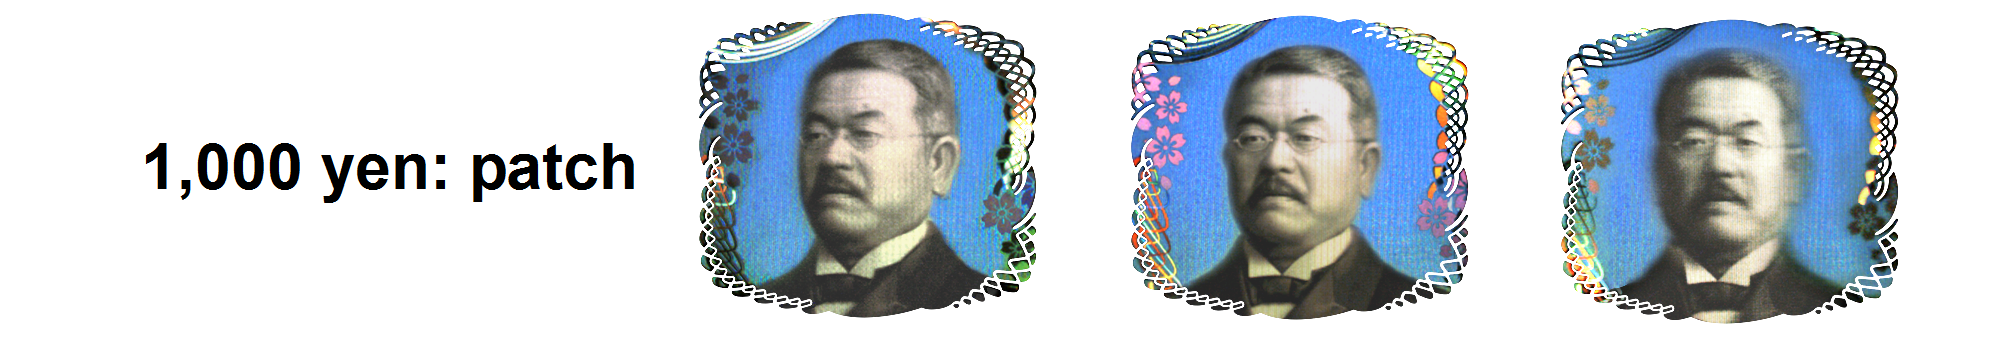 Images of the rotating 3-D portrait on the holographic patch of the 1,000 yen note, which can be seen when tilted left to right.